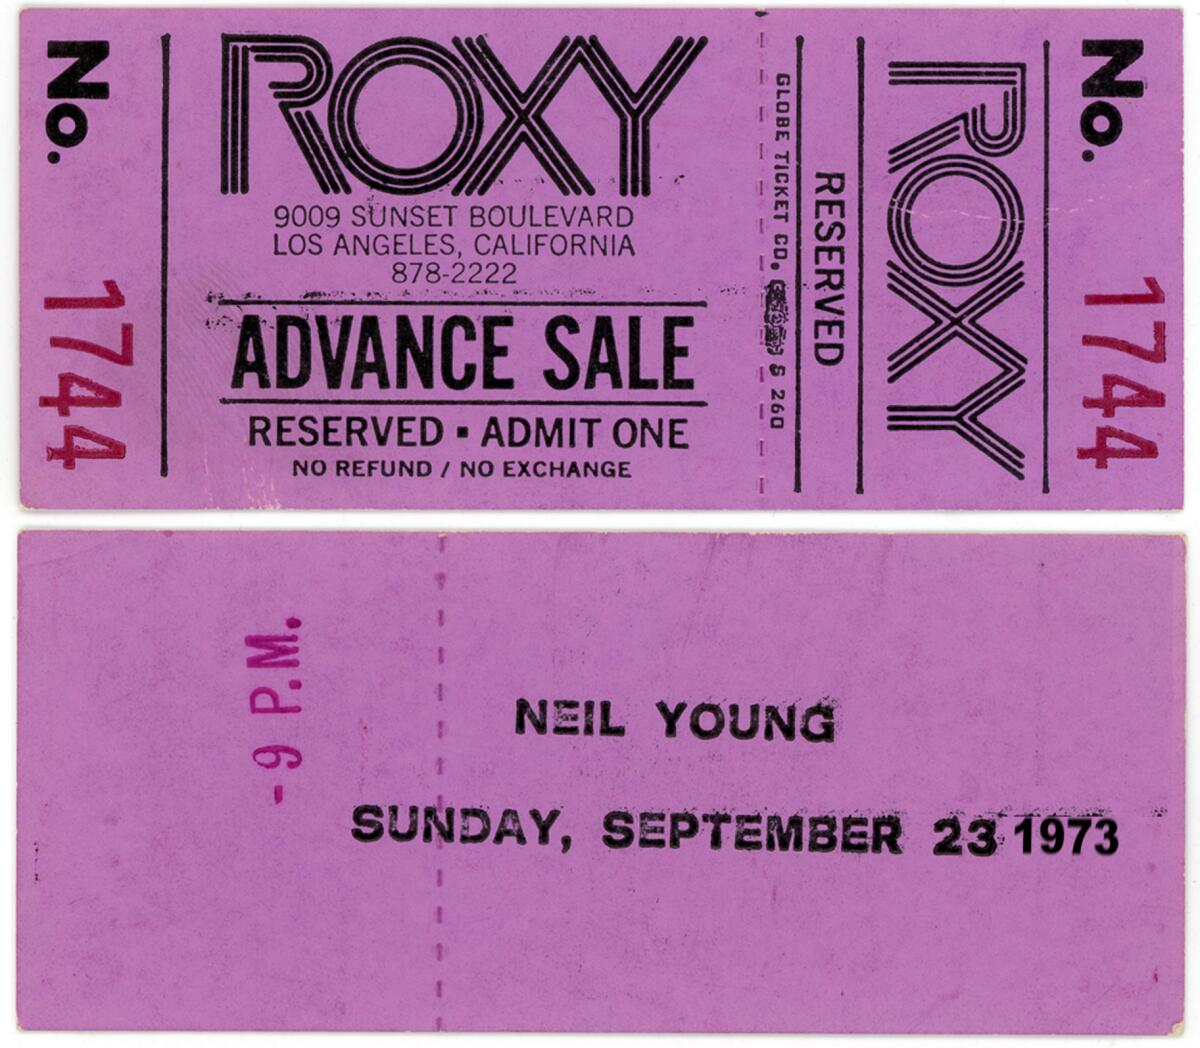 A purple ticket for a Neil Young concert at the Roxy in 1973.